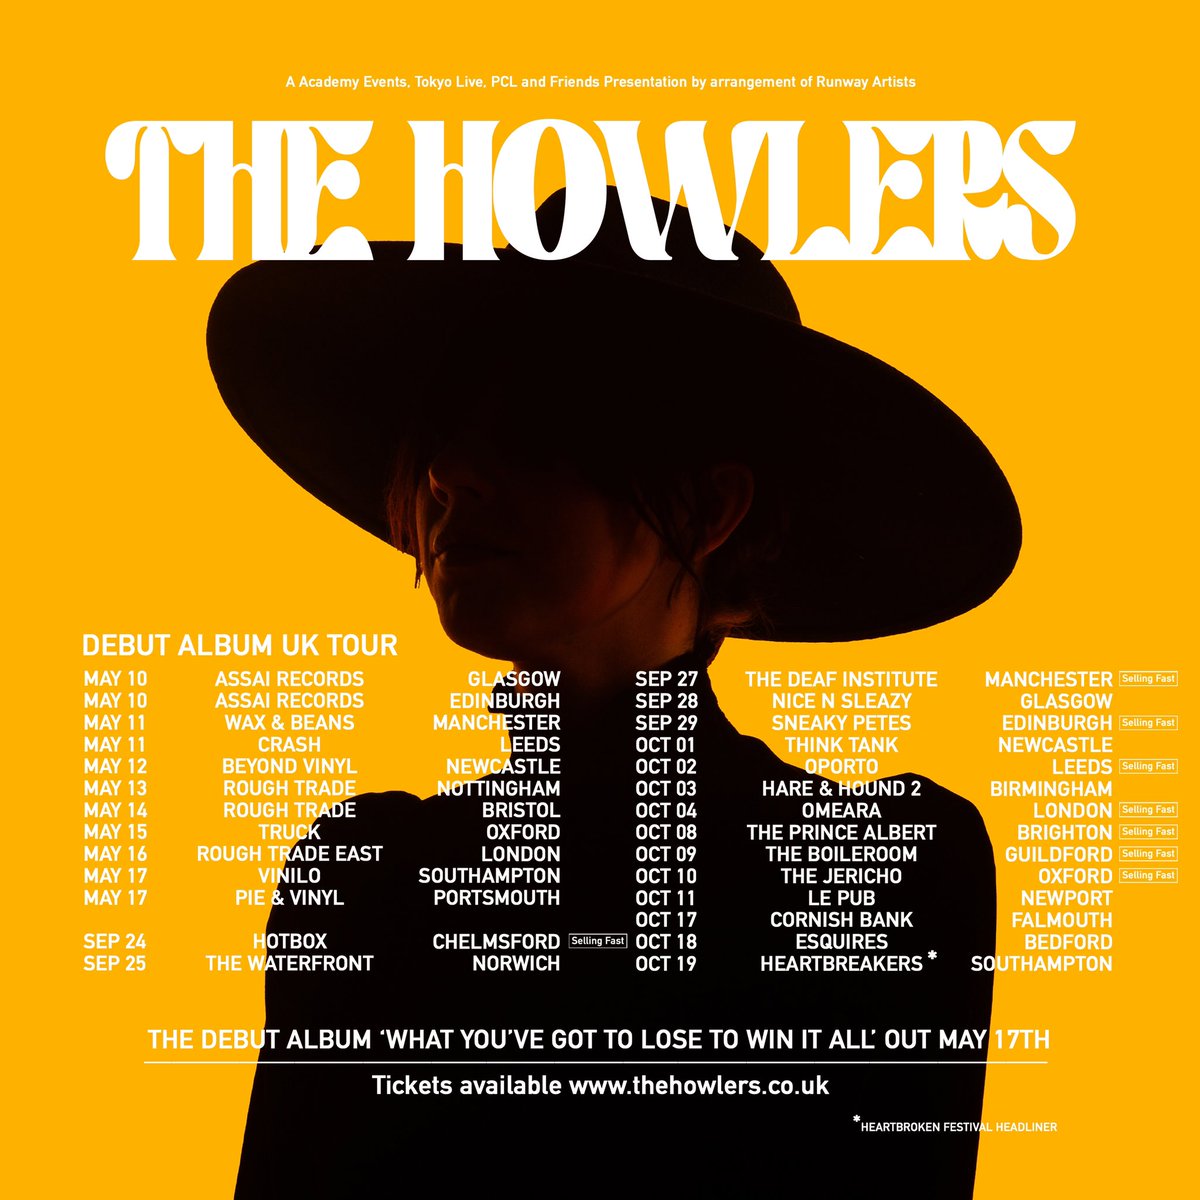 Don’t be last minute Larry, get a ticket early for our debut album tour, alot of dates are selling fast! And it’s only week 1: linktr.ee/thehowlersuk Not so fun fact, It’s pretty common for 80% of ticket sales to happen 2 weeks before a show these days (yep it’s a pain), which…